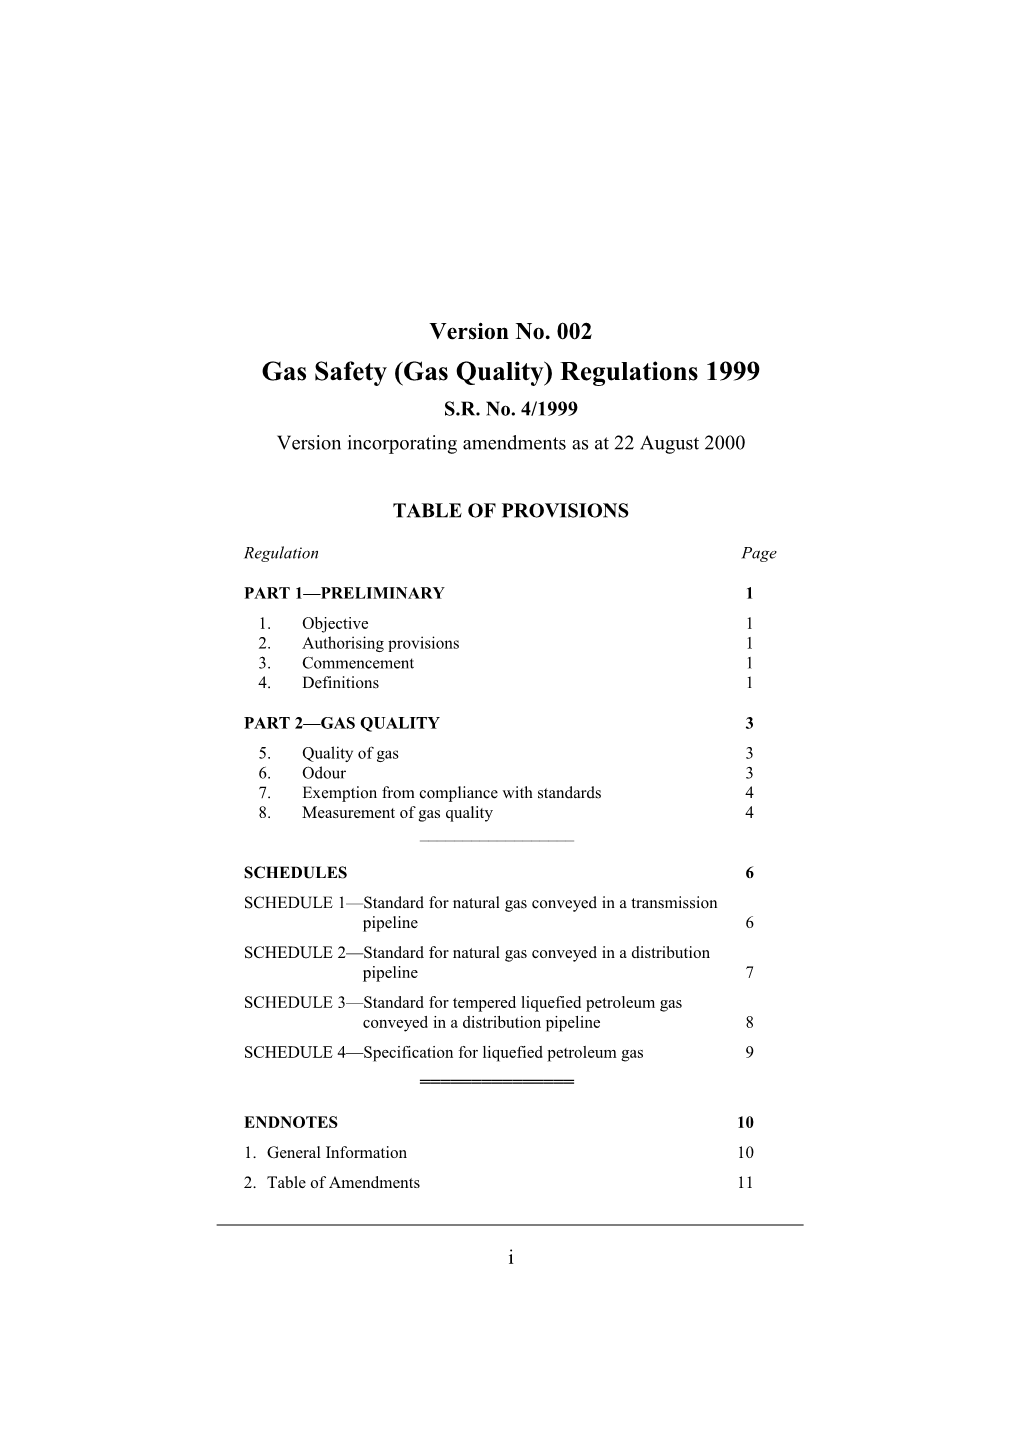 Gas Safety (Gas Quality) Regulations 1999